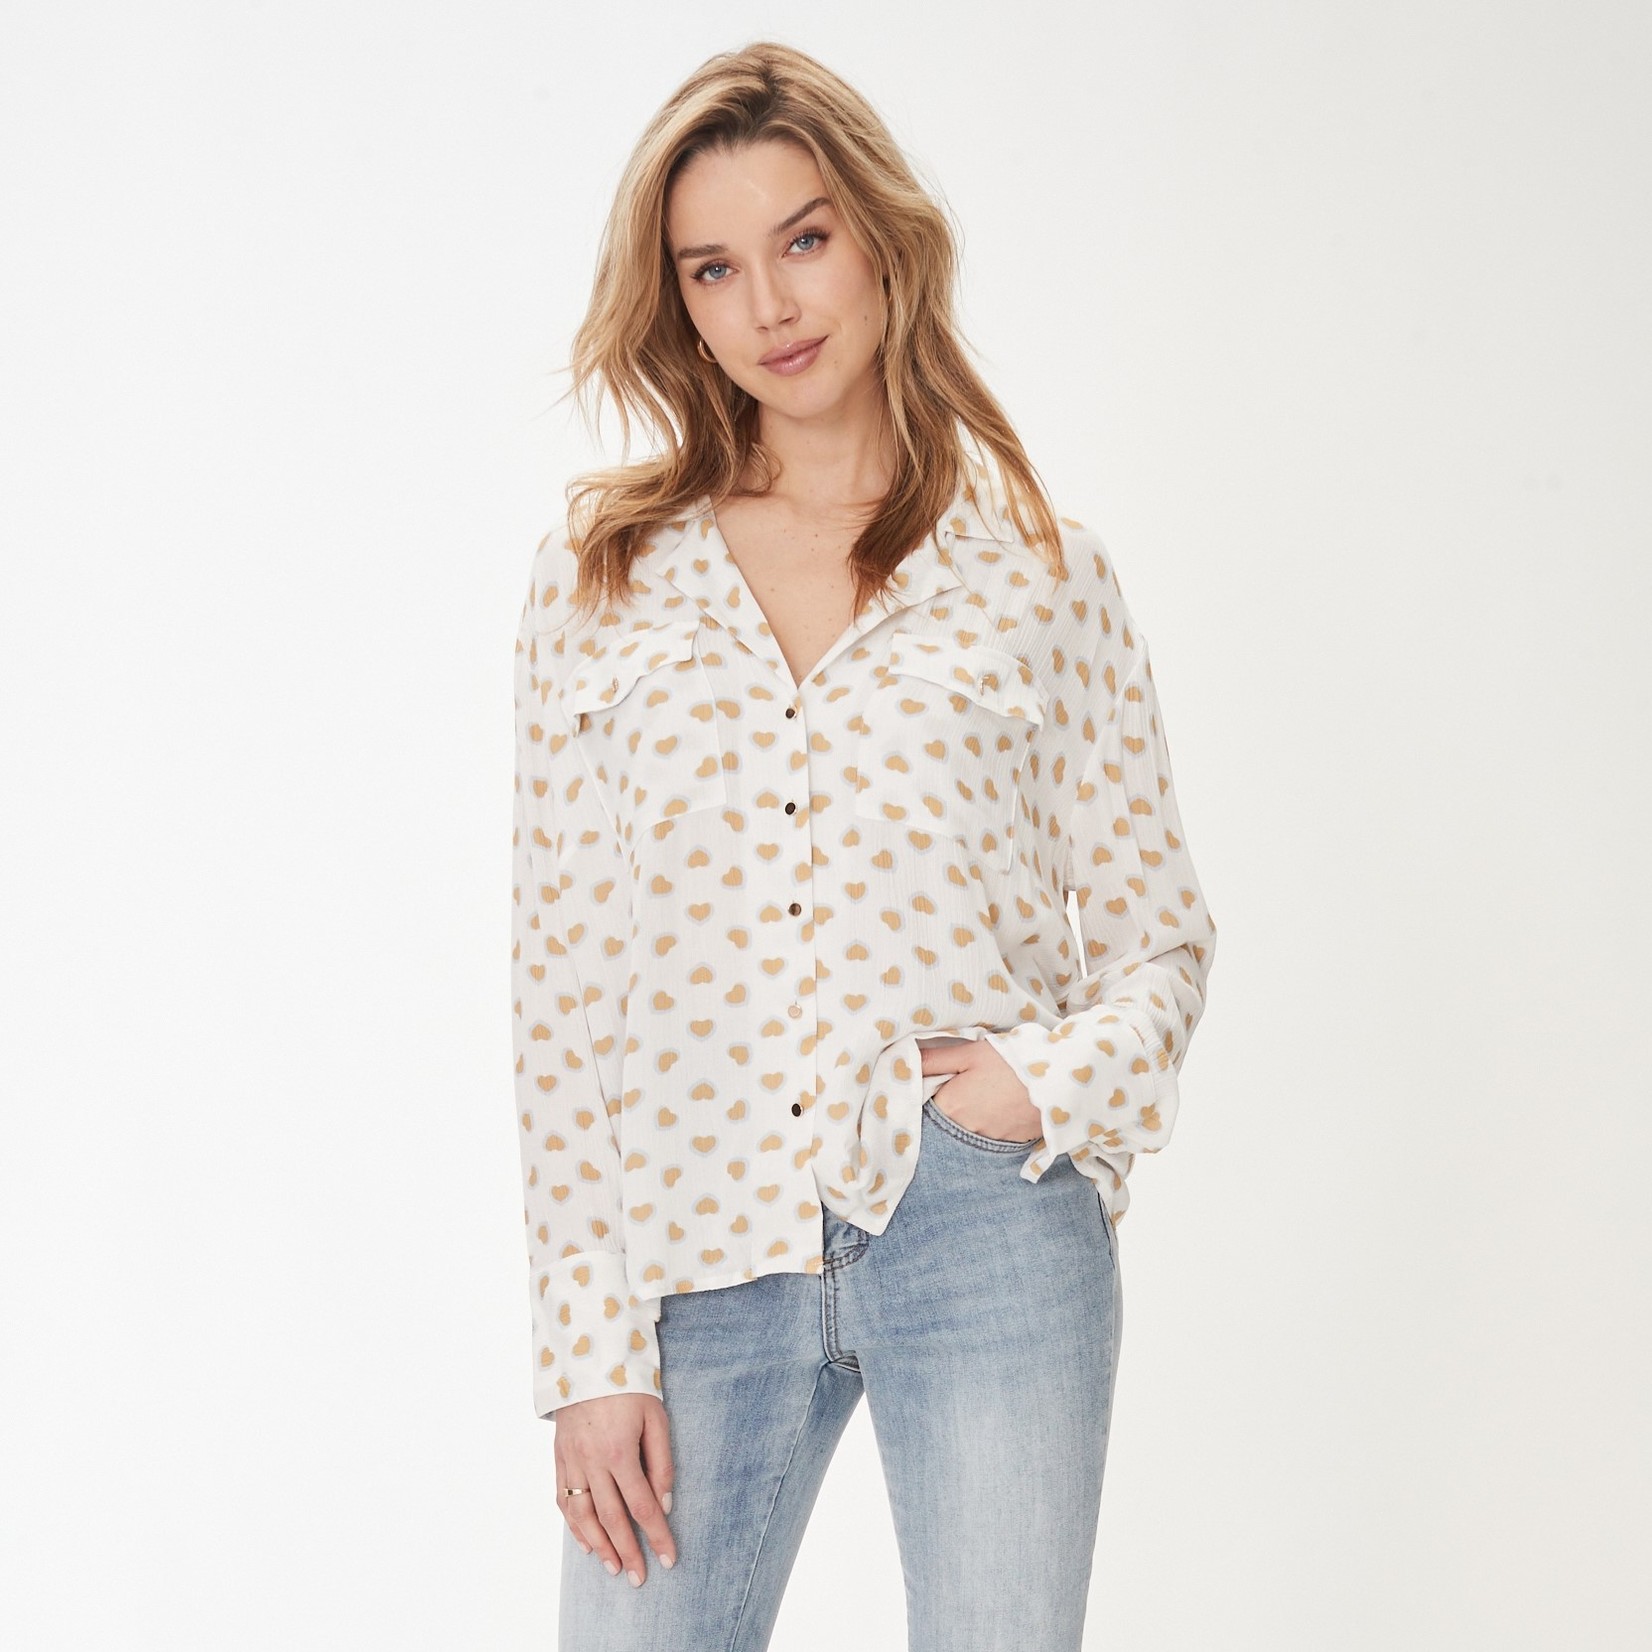 F D J Scattered Heart Printed Shirt